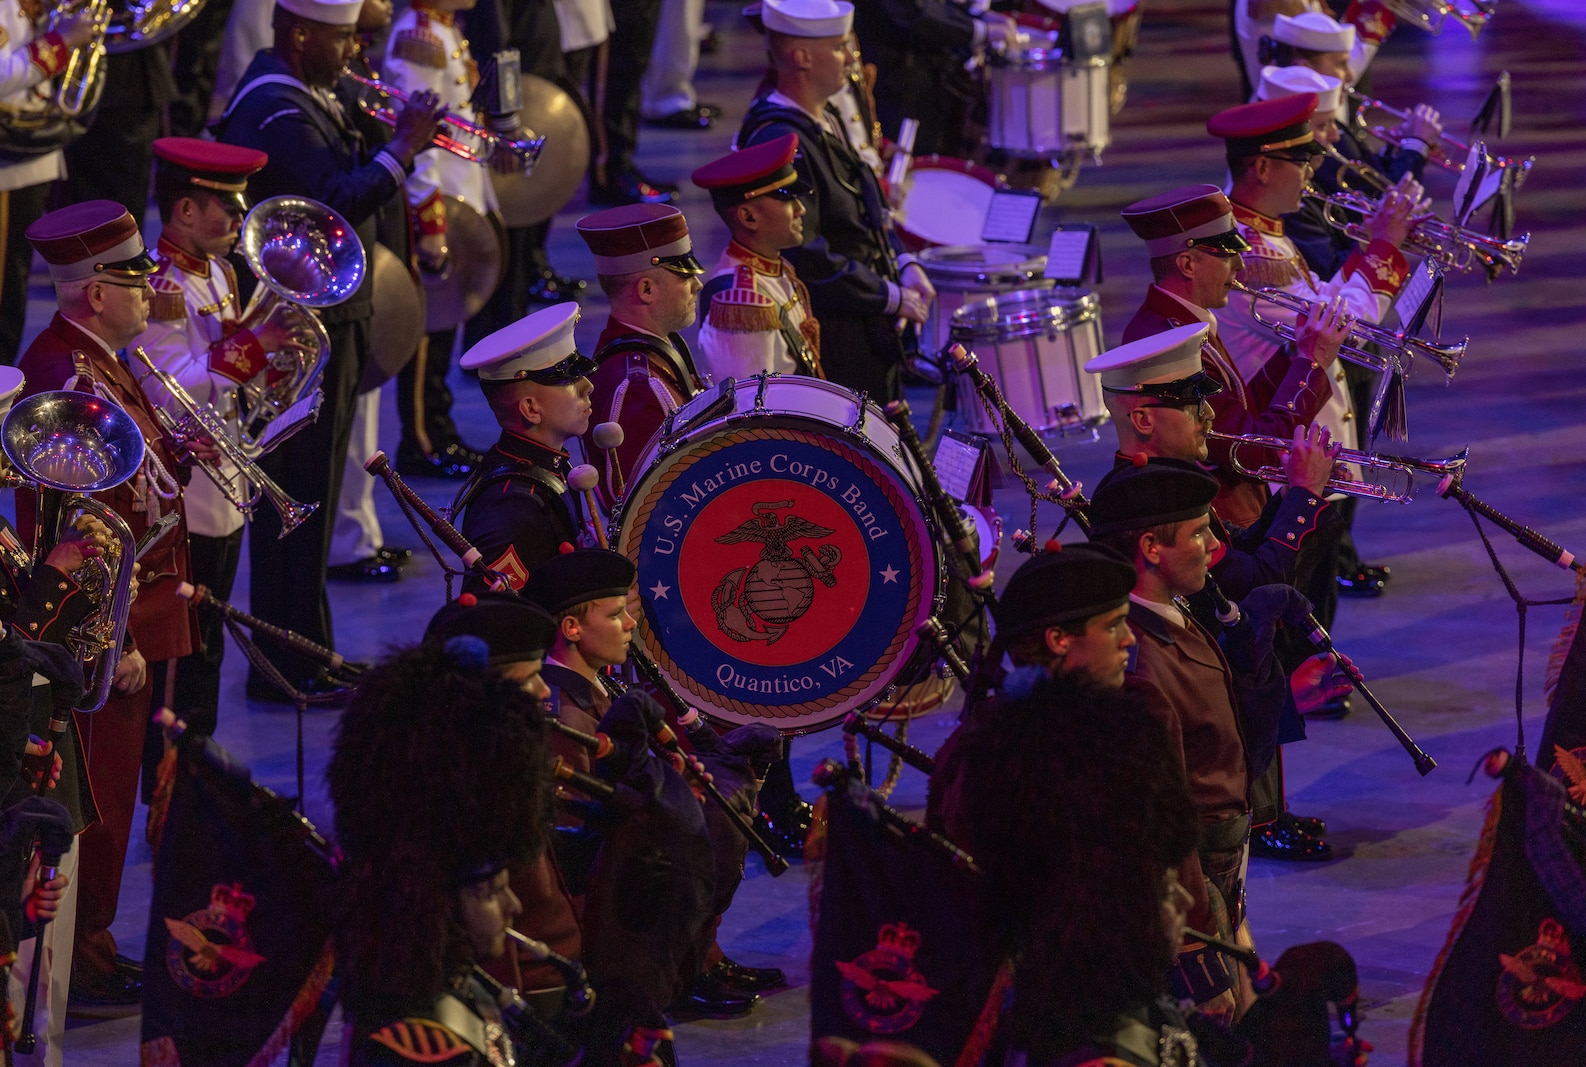 U.S. Marines with the Quantico Marine Corps Band perform alongside bands from around the globe during the Virginia International Tattoo in Norfolk, Virginia, April 19, 2023. The Virginia International Tattoo is an annual military music and arts festival featuring performances by military bands, drill teams, dancers, and artists from around the world. The event creates a sense of camaraderie and mutual respect among the participants, who come from different branches of the military and different countries, but share a common commitment to service and sacrifice. (U.S. Marine Corps Photo by Lance Cpl. Kayla LeClaire)